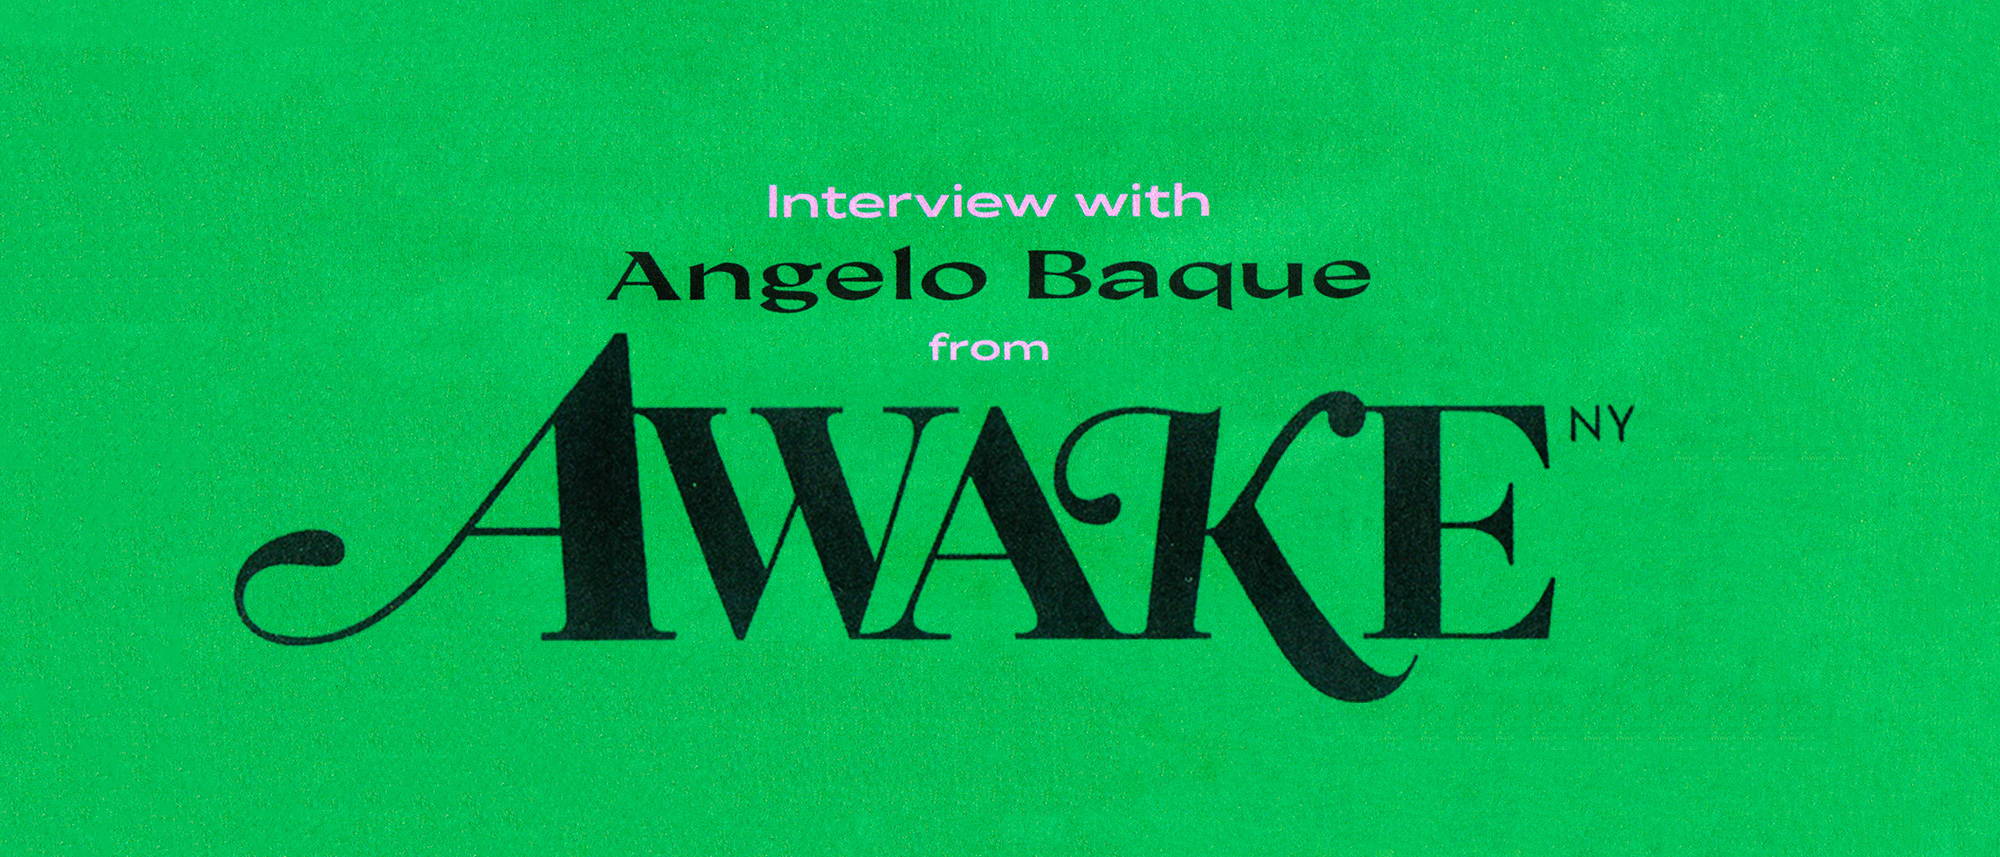 Awake NY x Tommy Hilfiger Angelo Baque Interview